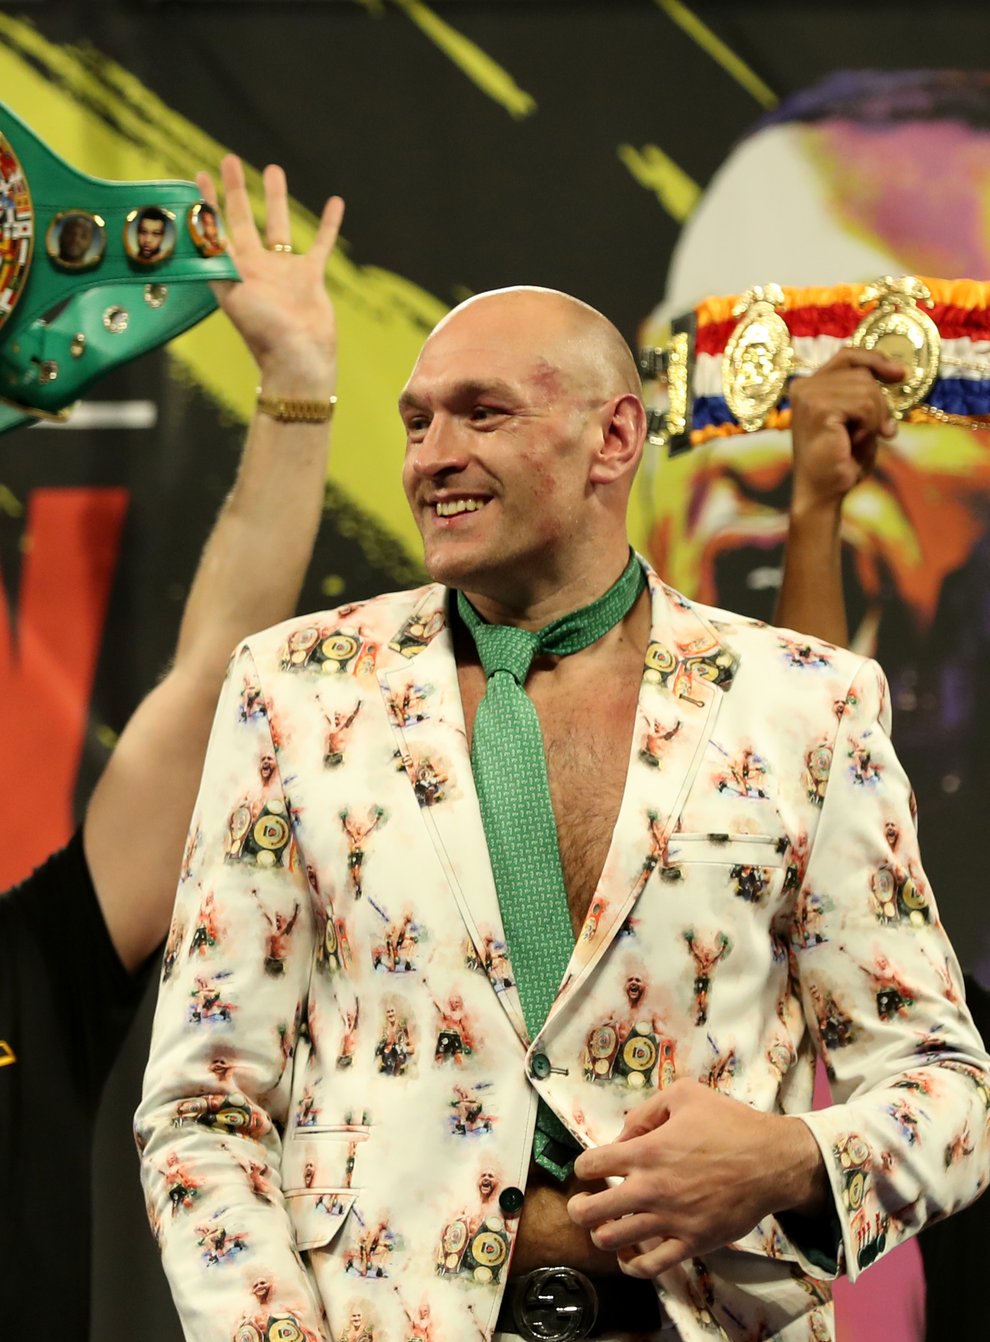 Fury insists he wants to fight in the UK in December